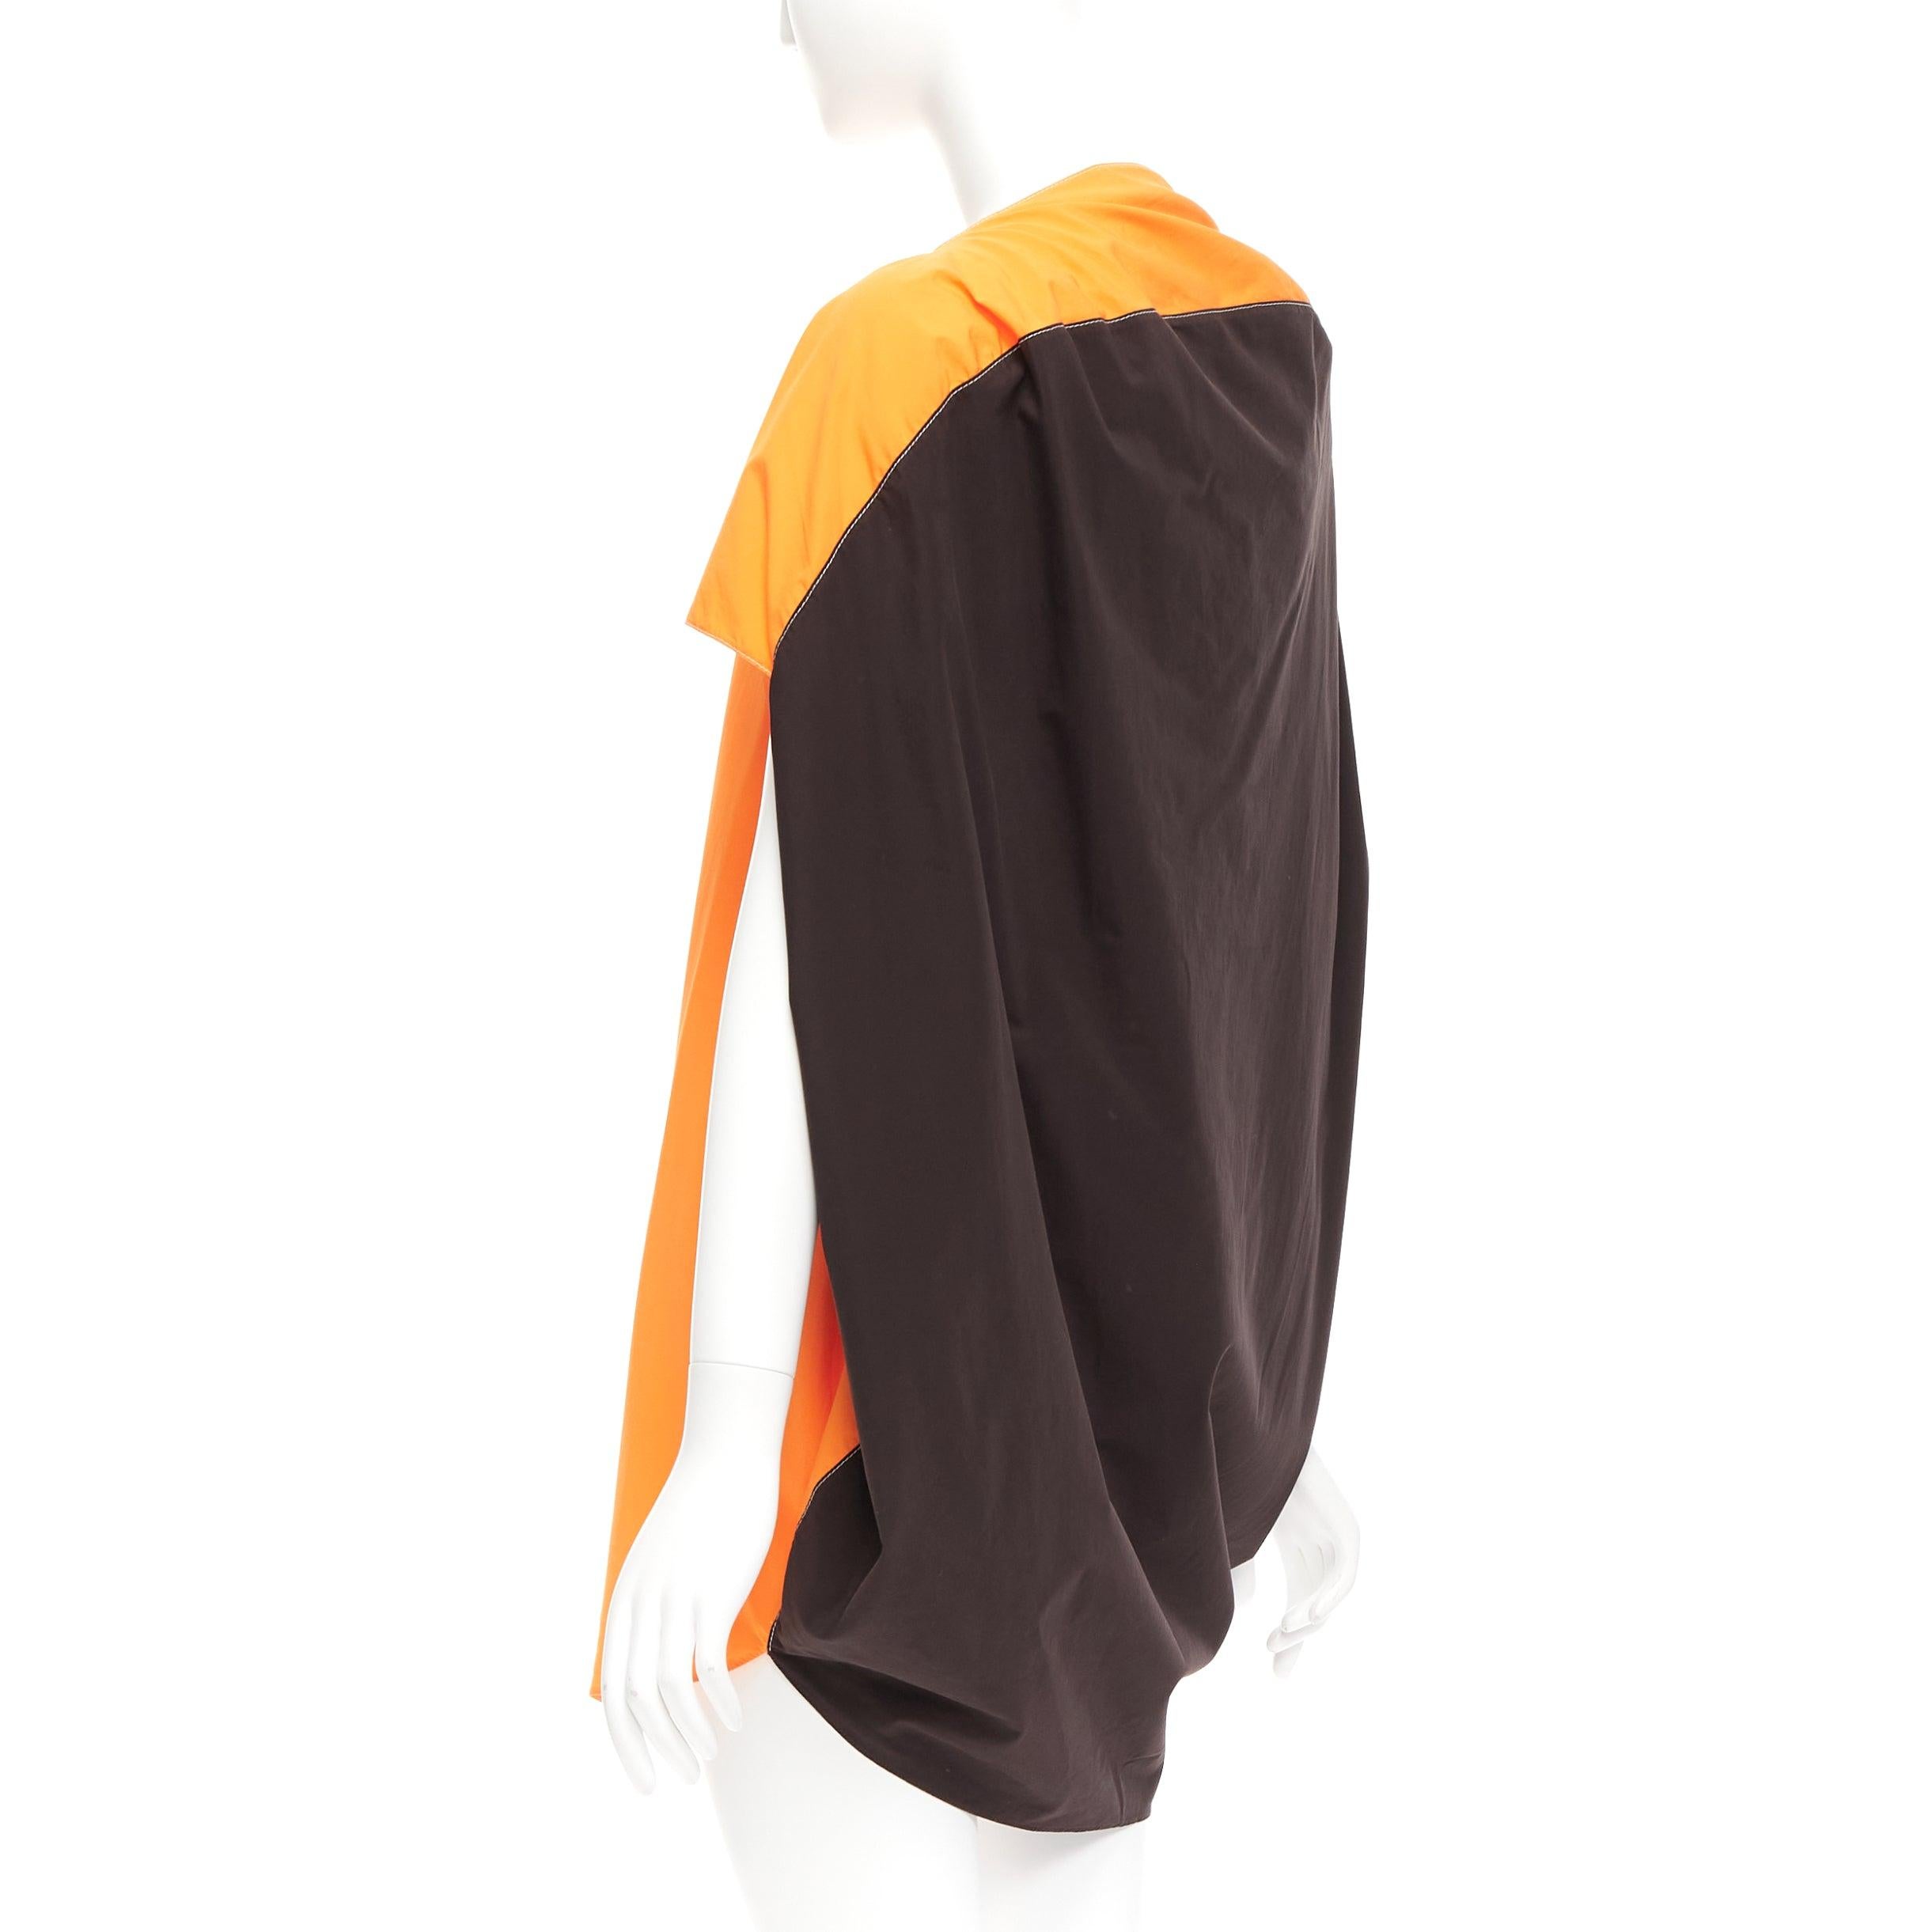 MARNI orange front brown cocoon back 3D cut mini dress IT36 XS
Reference: CELG/A00318
Brand: Marni
Material: Cotton
Color: Orange, Brown
Pattern: Solid
Closure: Slip On
Extra Details: Cocoon silhouette.
Made in: Italy

CONDITION:
Condition: Very